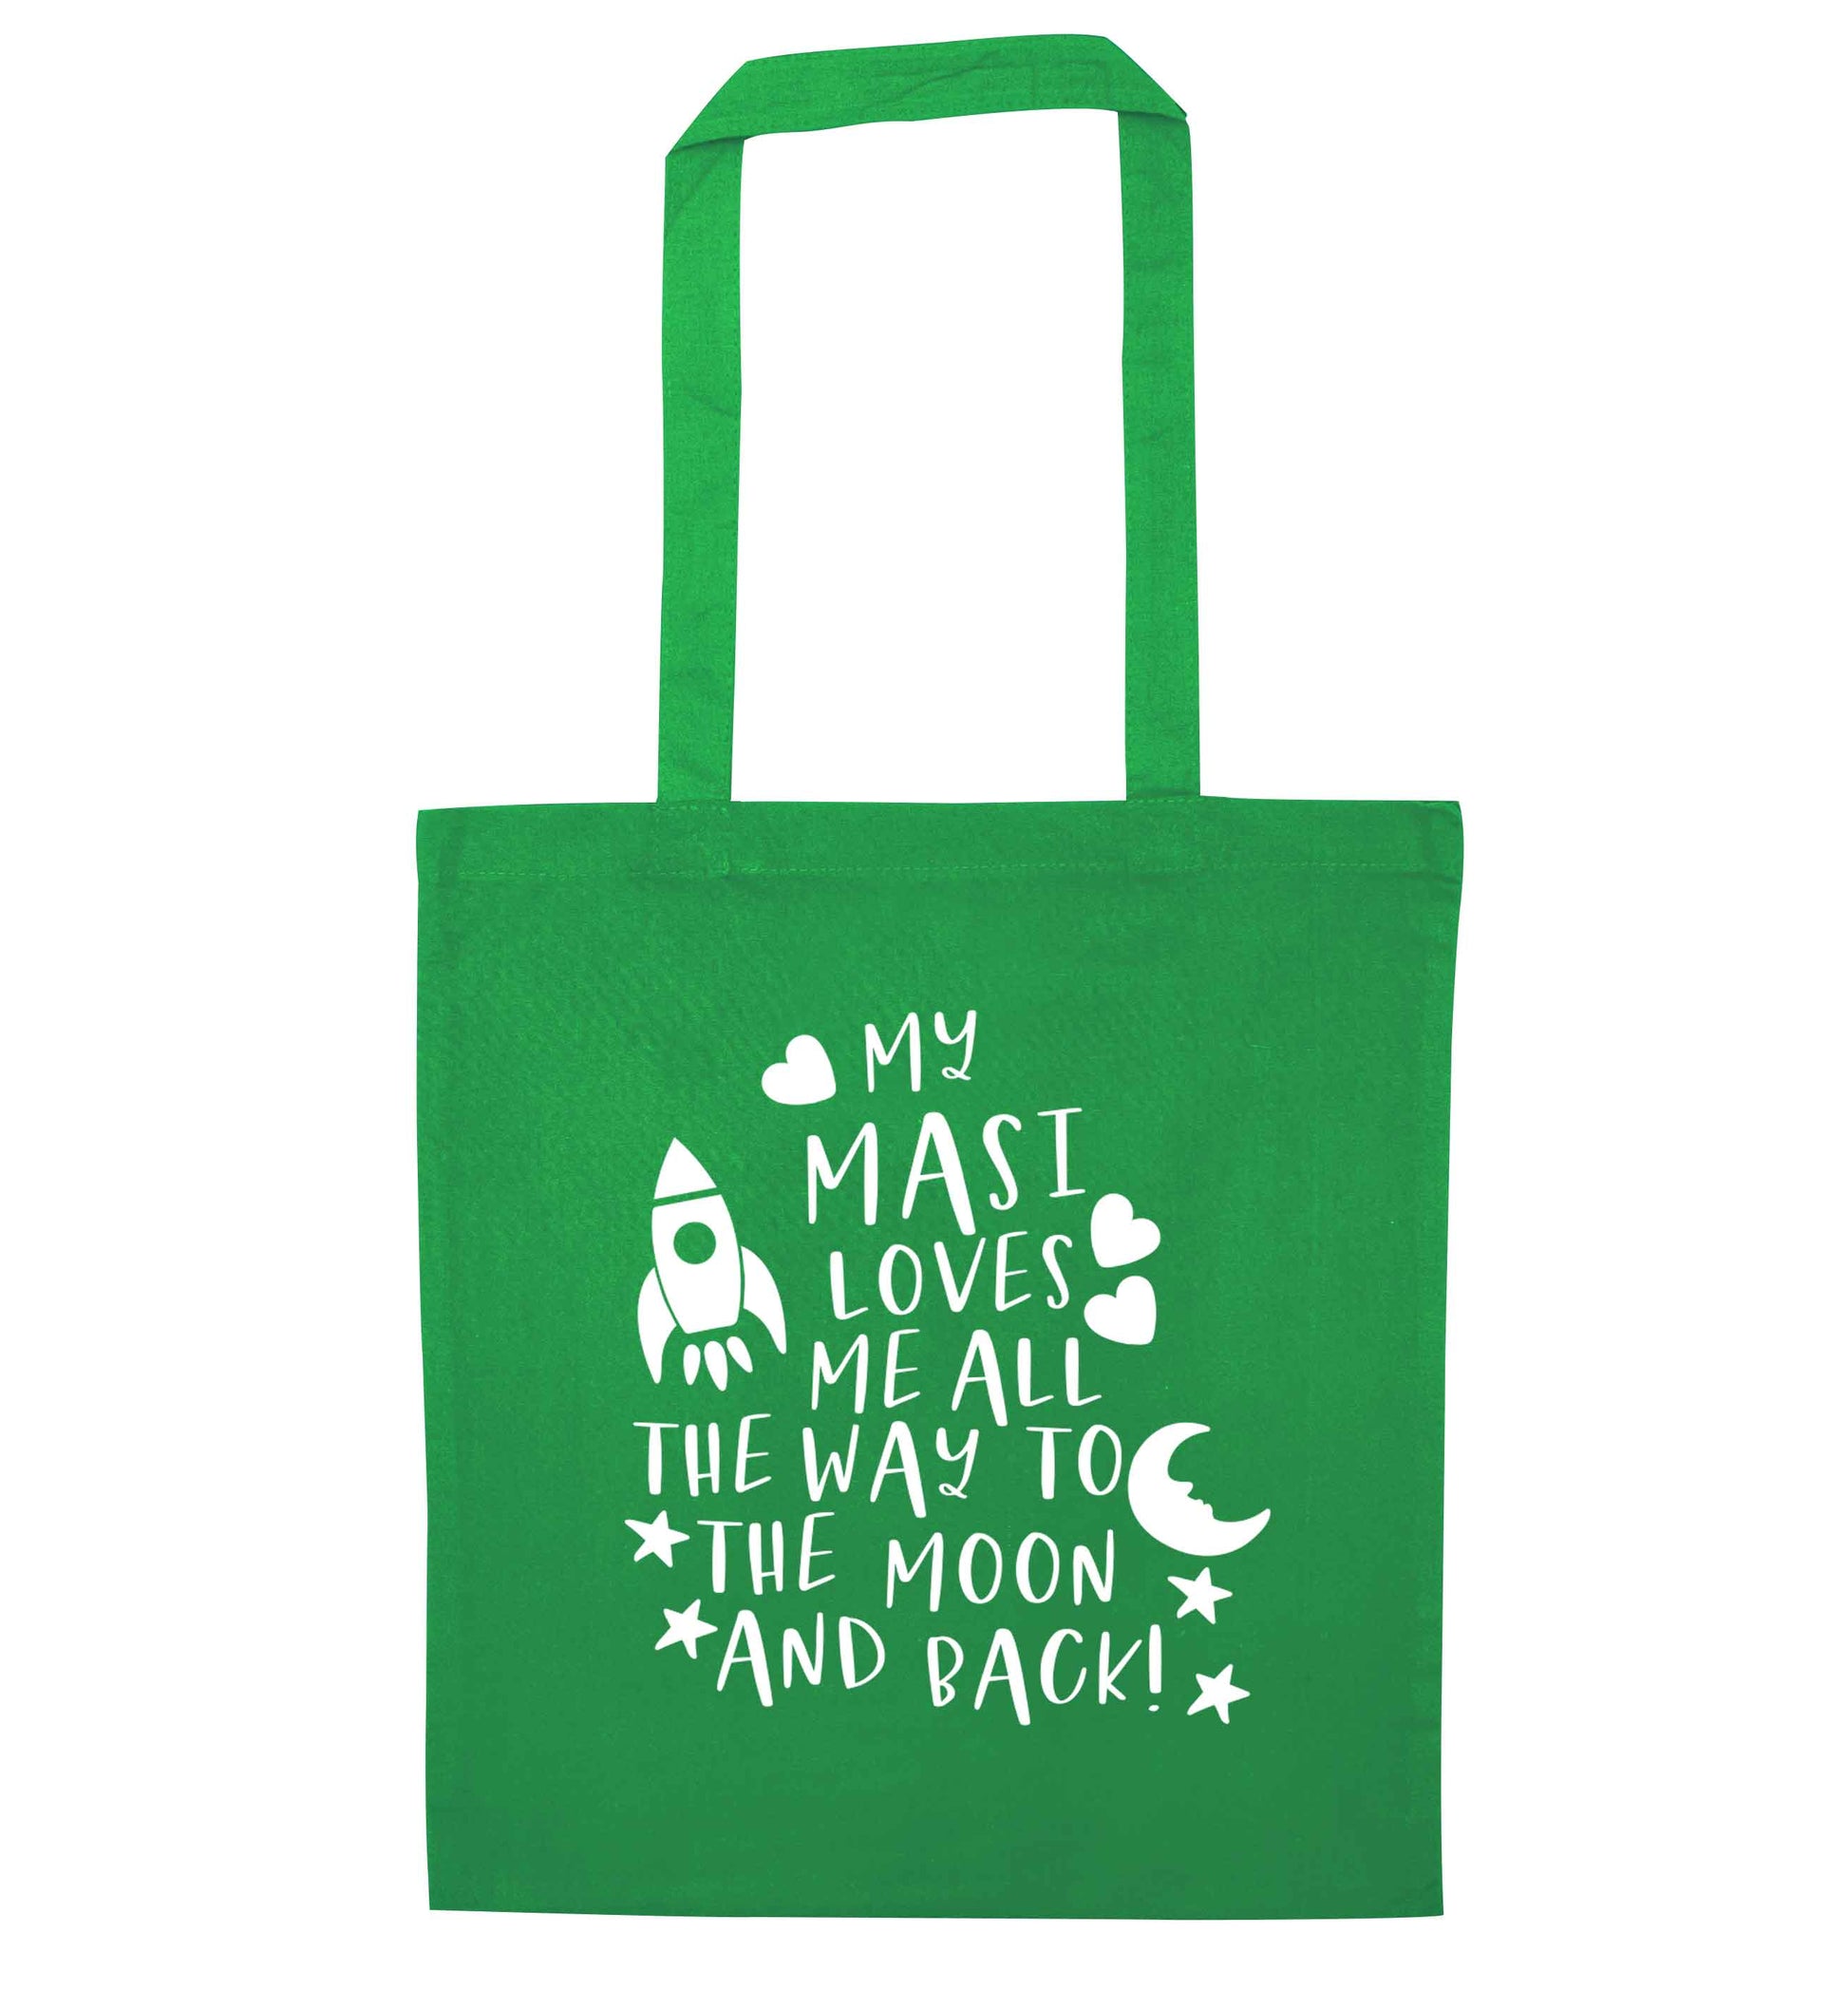 My masi loves me all the way to the moon and back green tote bag